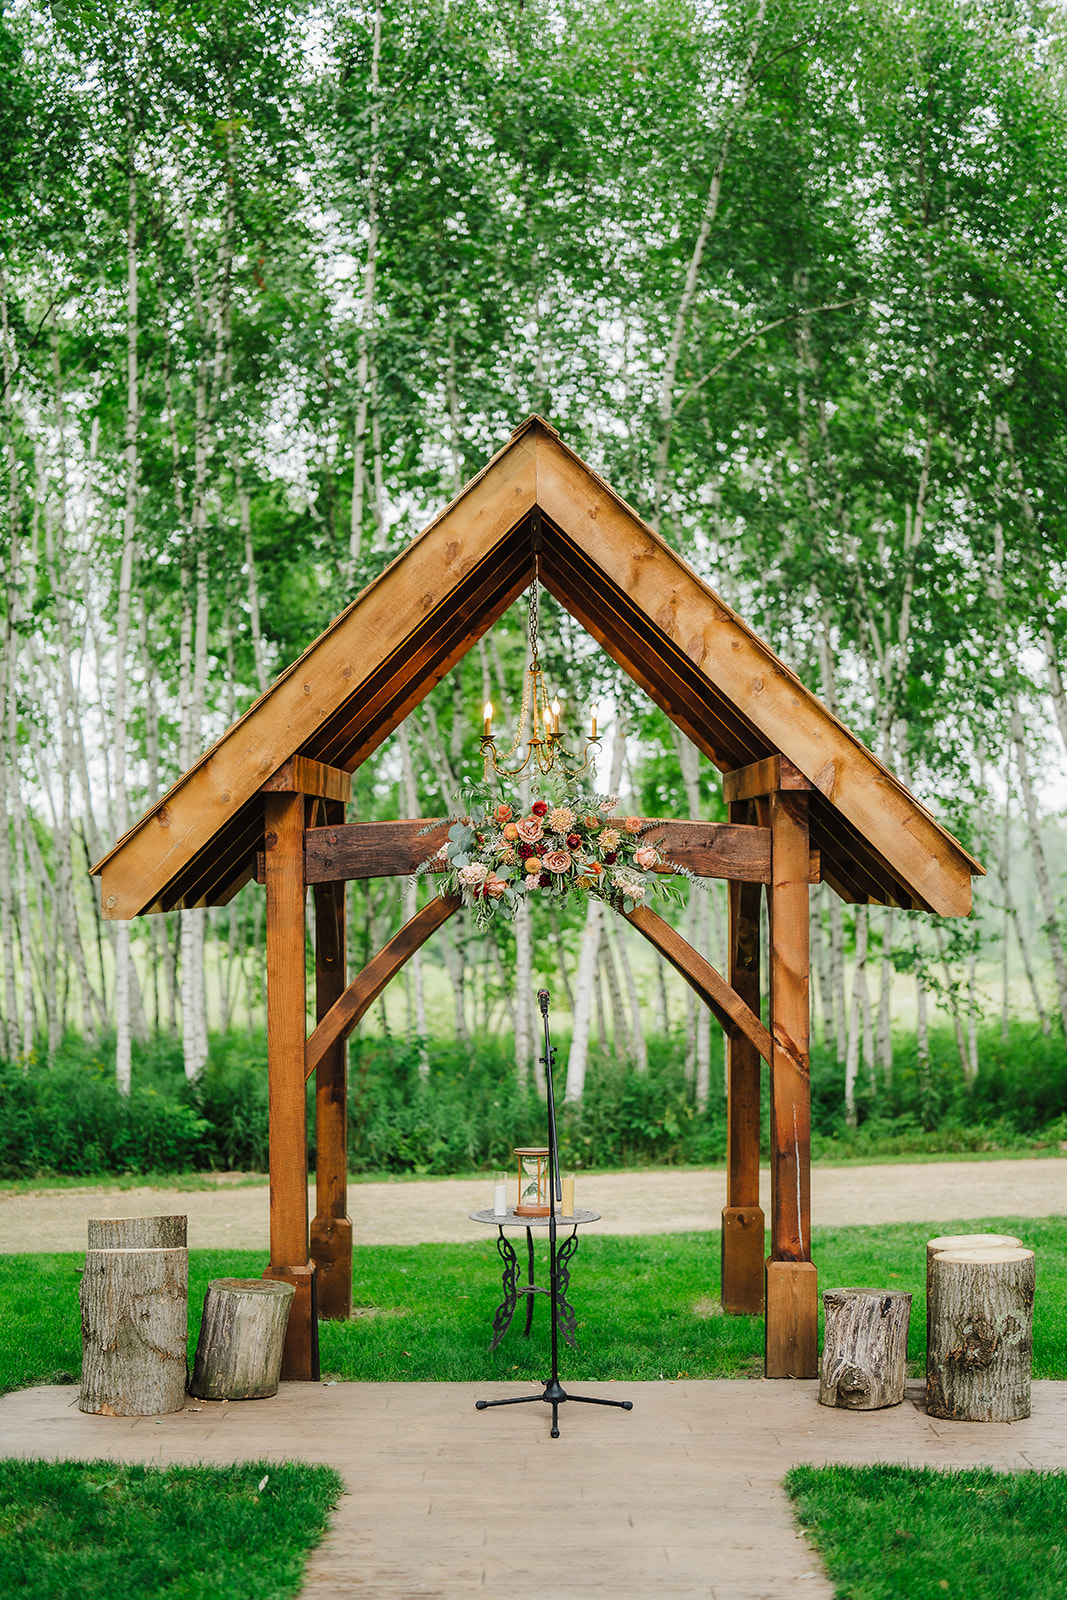 A rustic arch adorned with flowers is ready for the Chippewa Valley wedding ceremony to begin. Apple orchard venue Rustic wedding arch Rustic wedding ceremony #dixonappleorchard #orchardweddingvenue #outdoorwedding #appleorchardwedding #wisconsinweddingvenue
